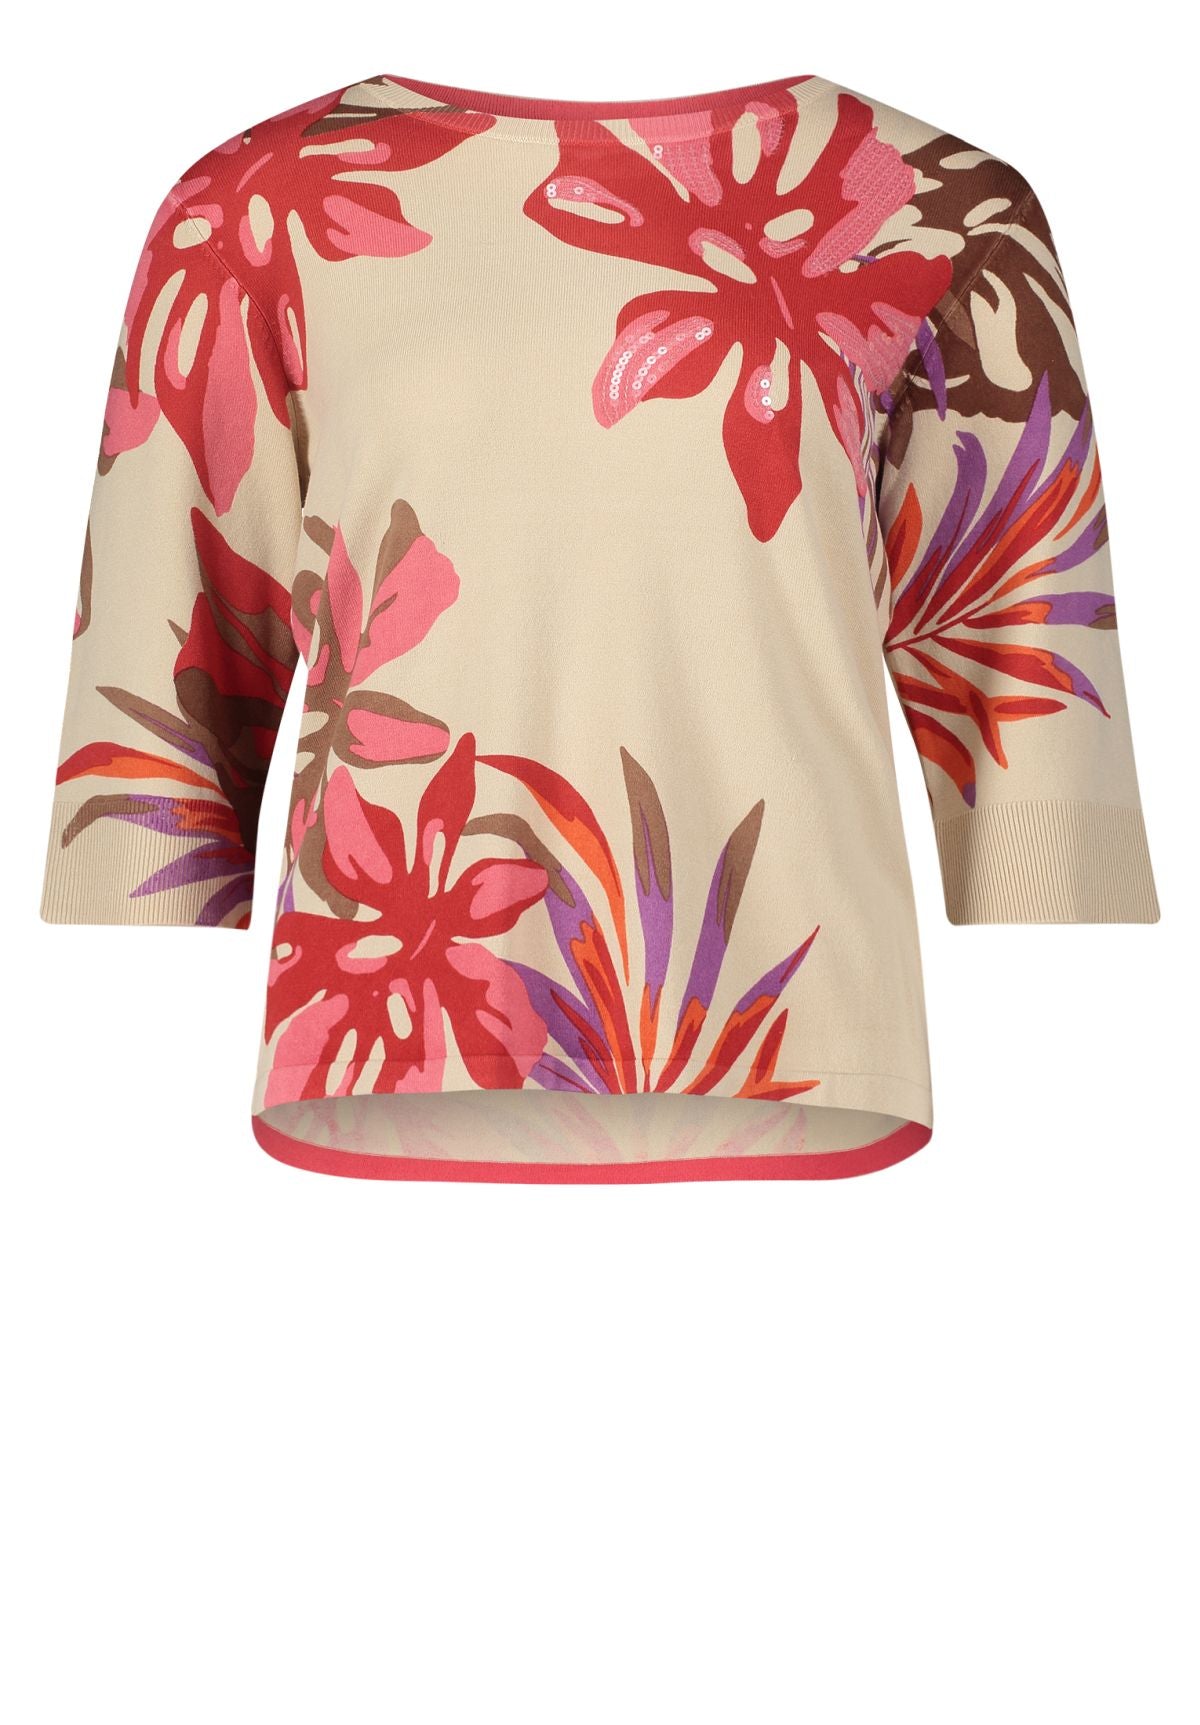 Betty Barclay Floral Print Sweater